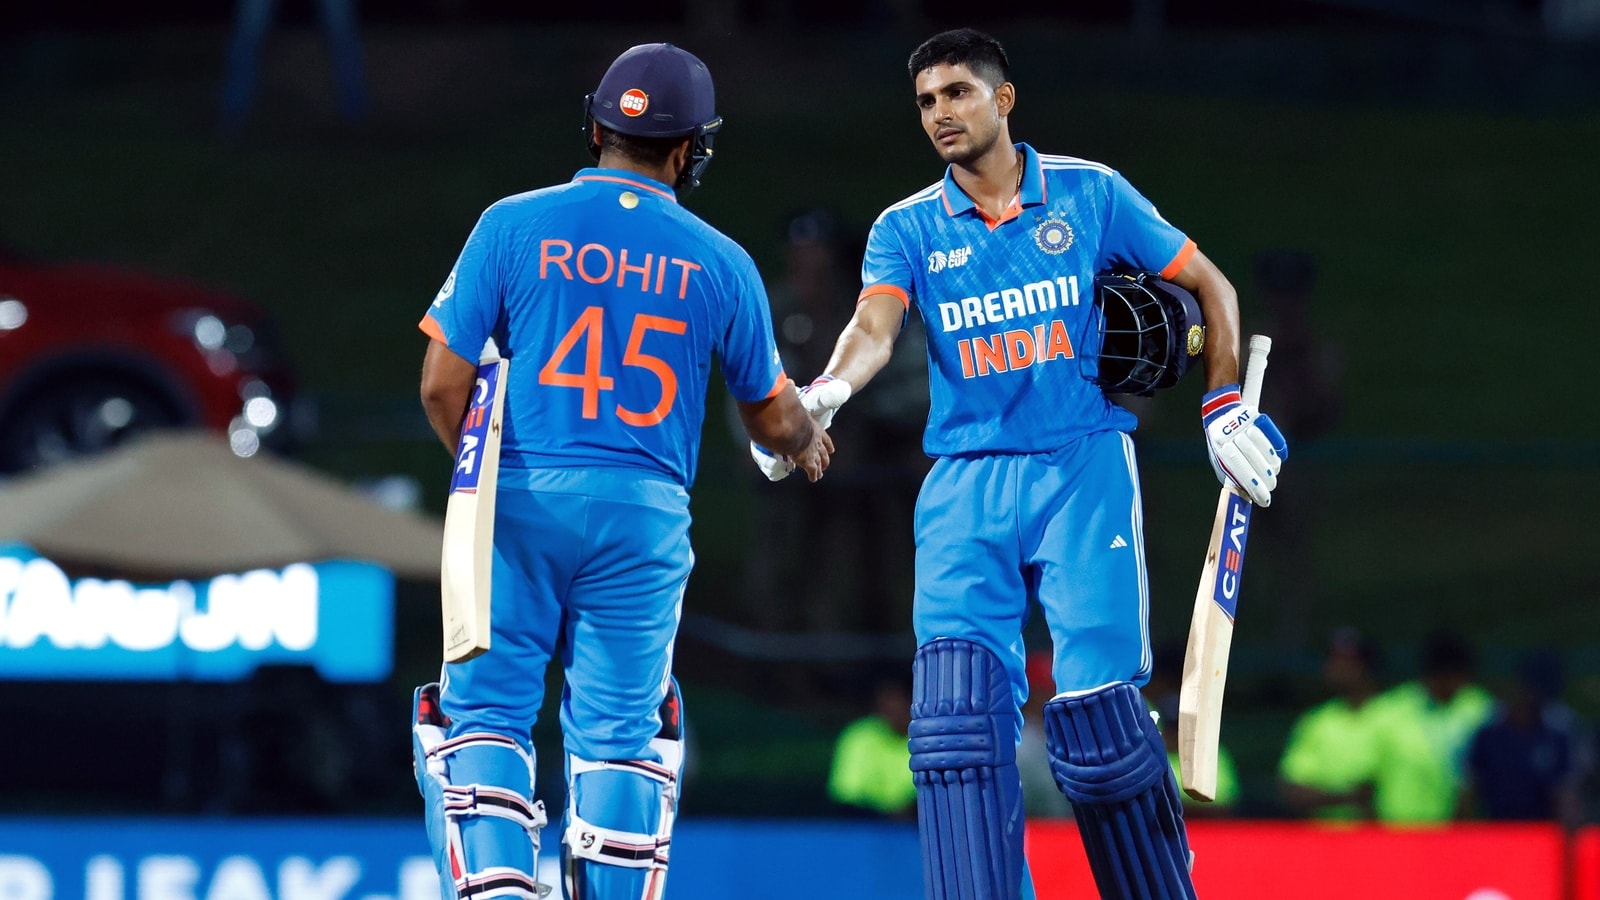 Shubman Gill and Rohit Sharma | Image: Getty Images